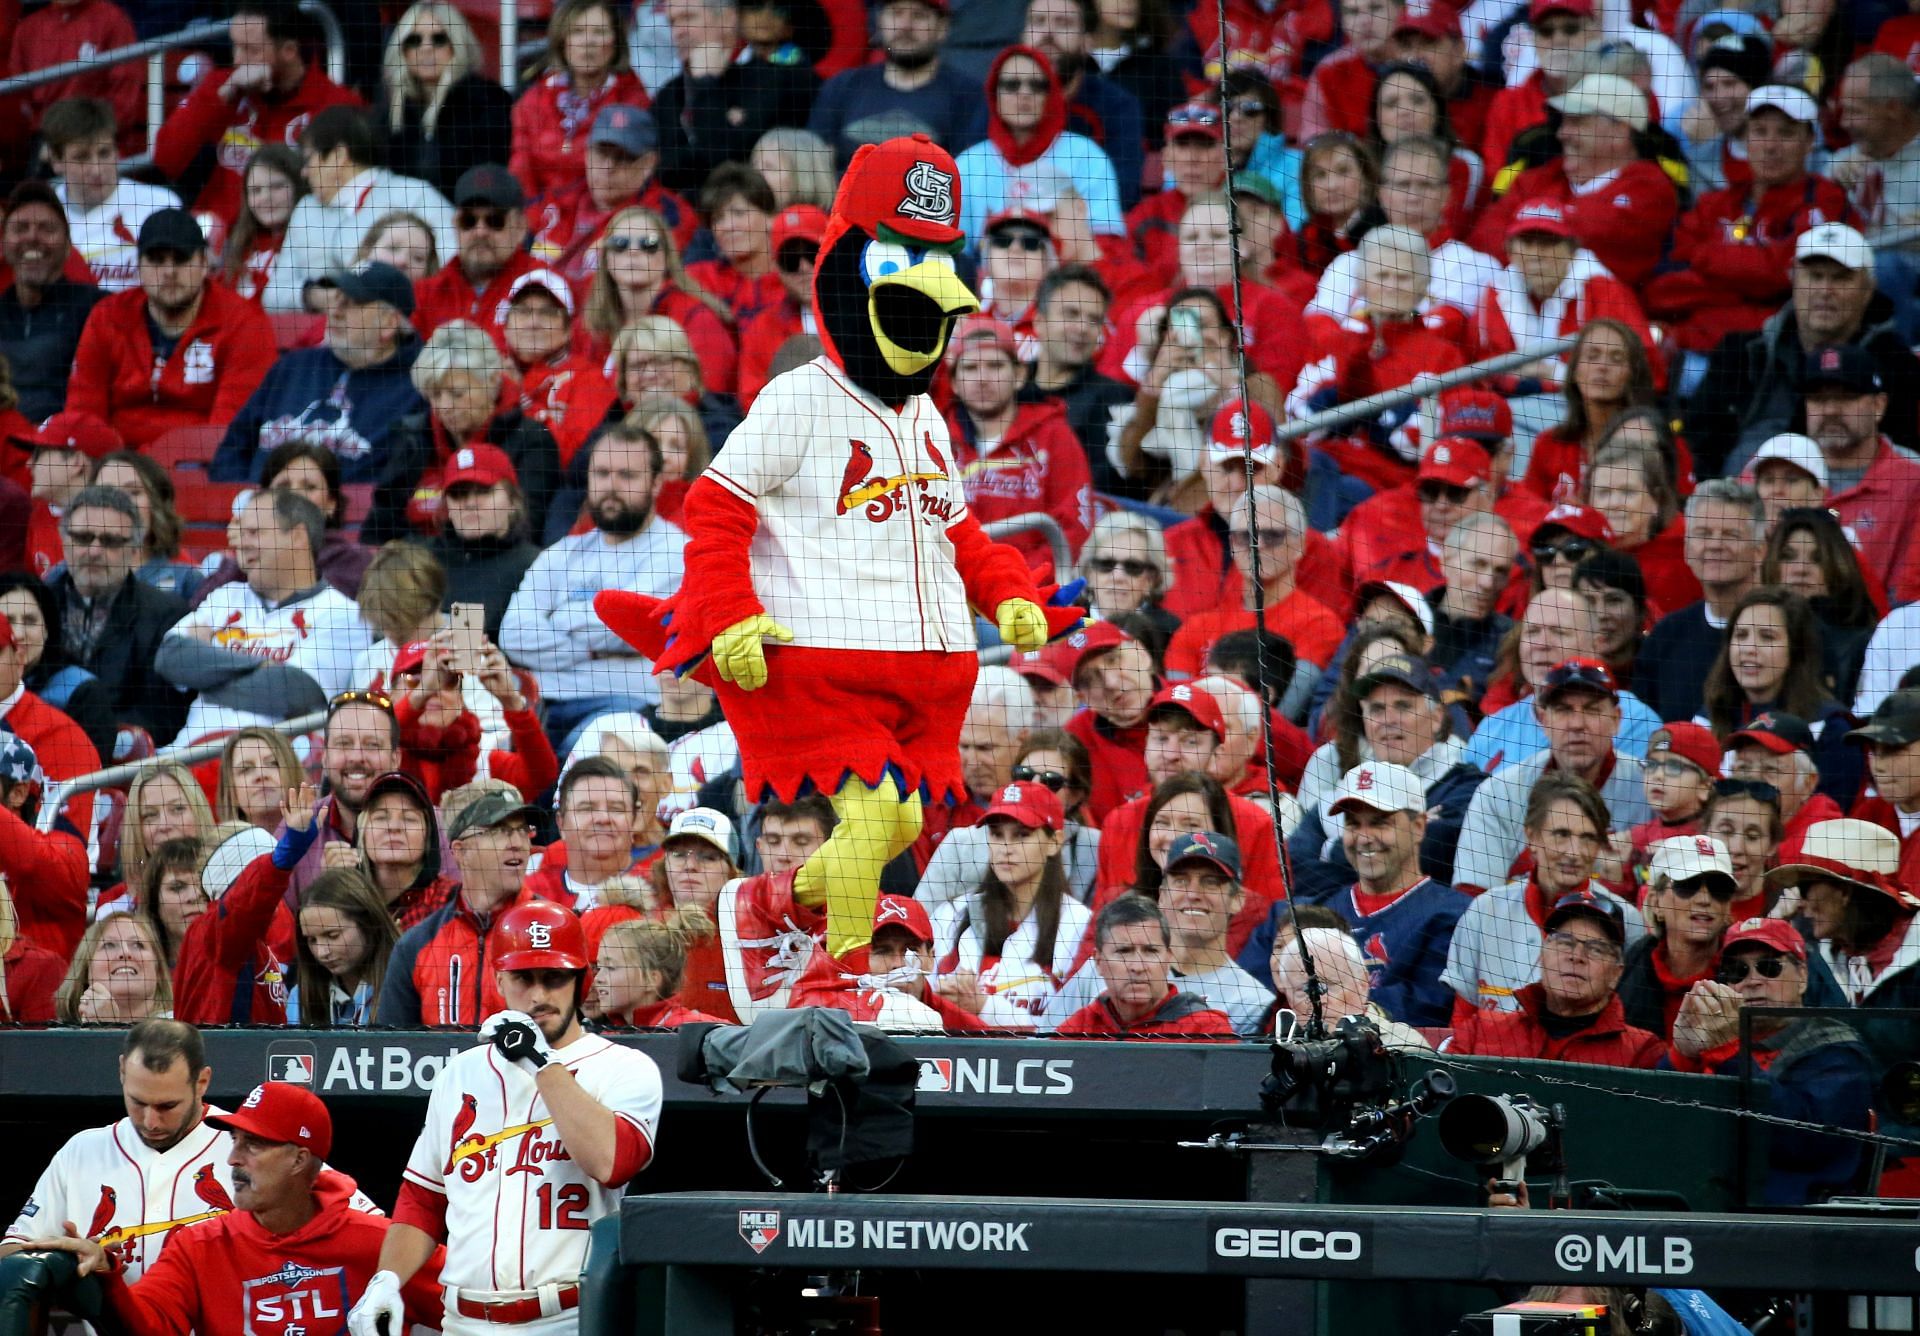 The St. Louis Cardinals have a loyal fanbase covering a large portion of the American Midwest